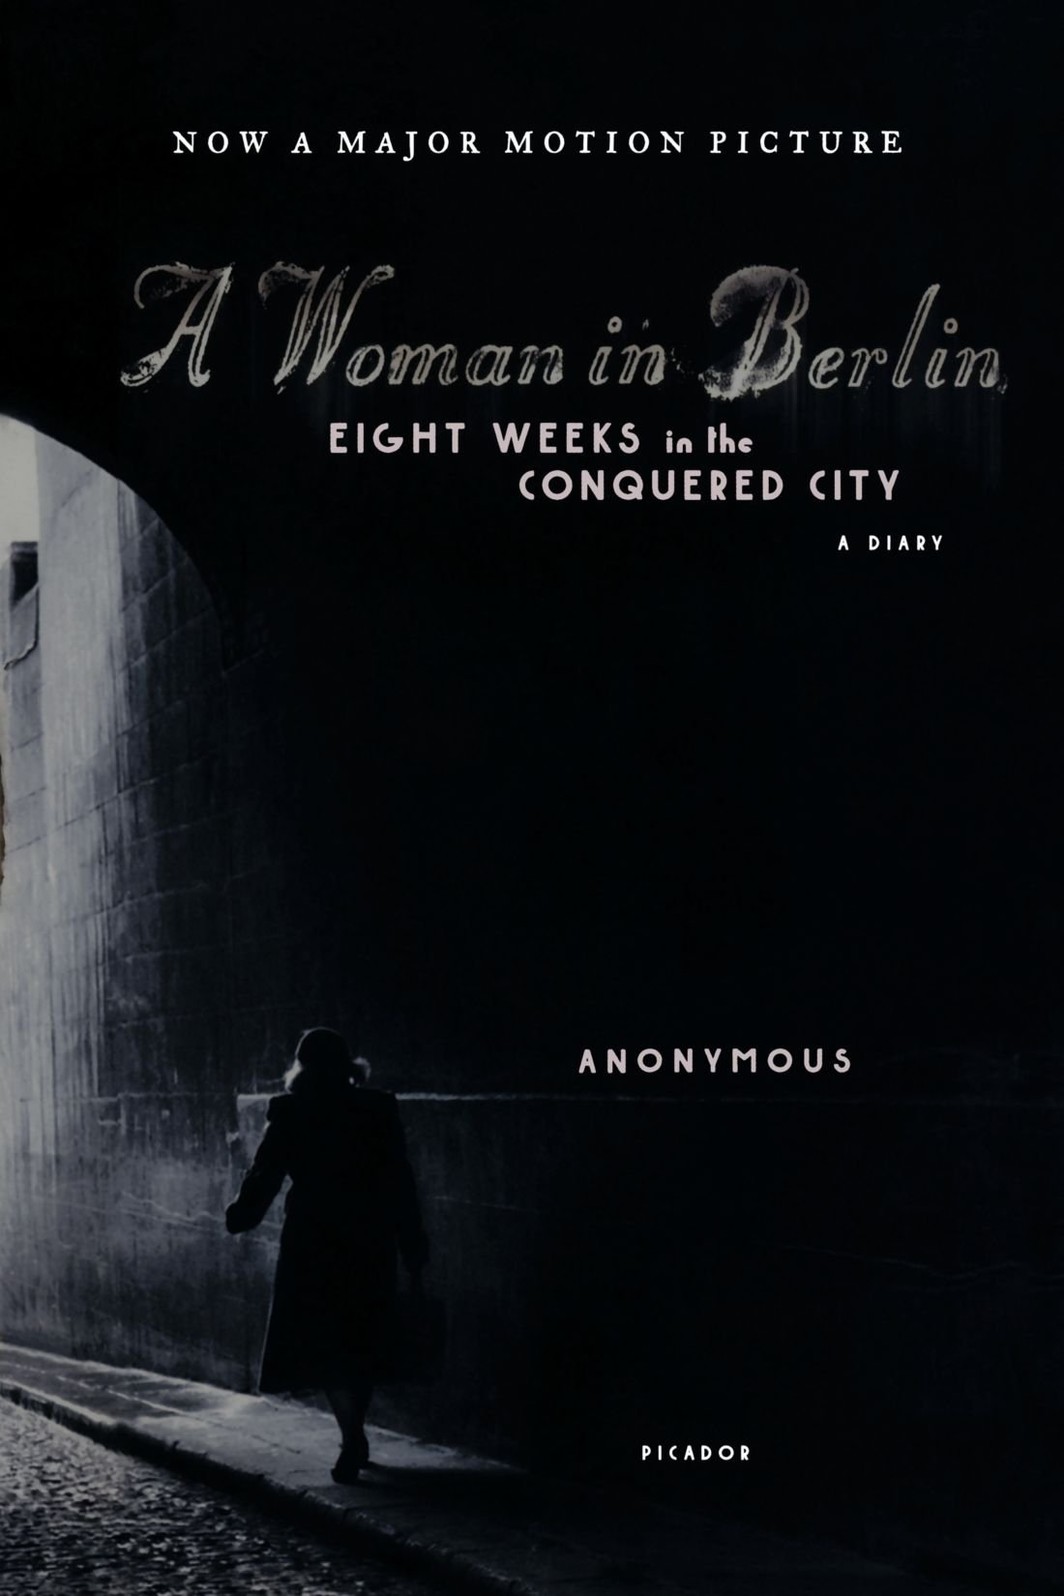 The cover of A Woman in Berlin: Eight Weeks in the Conquered City